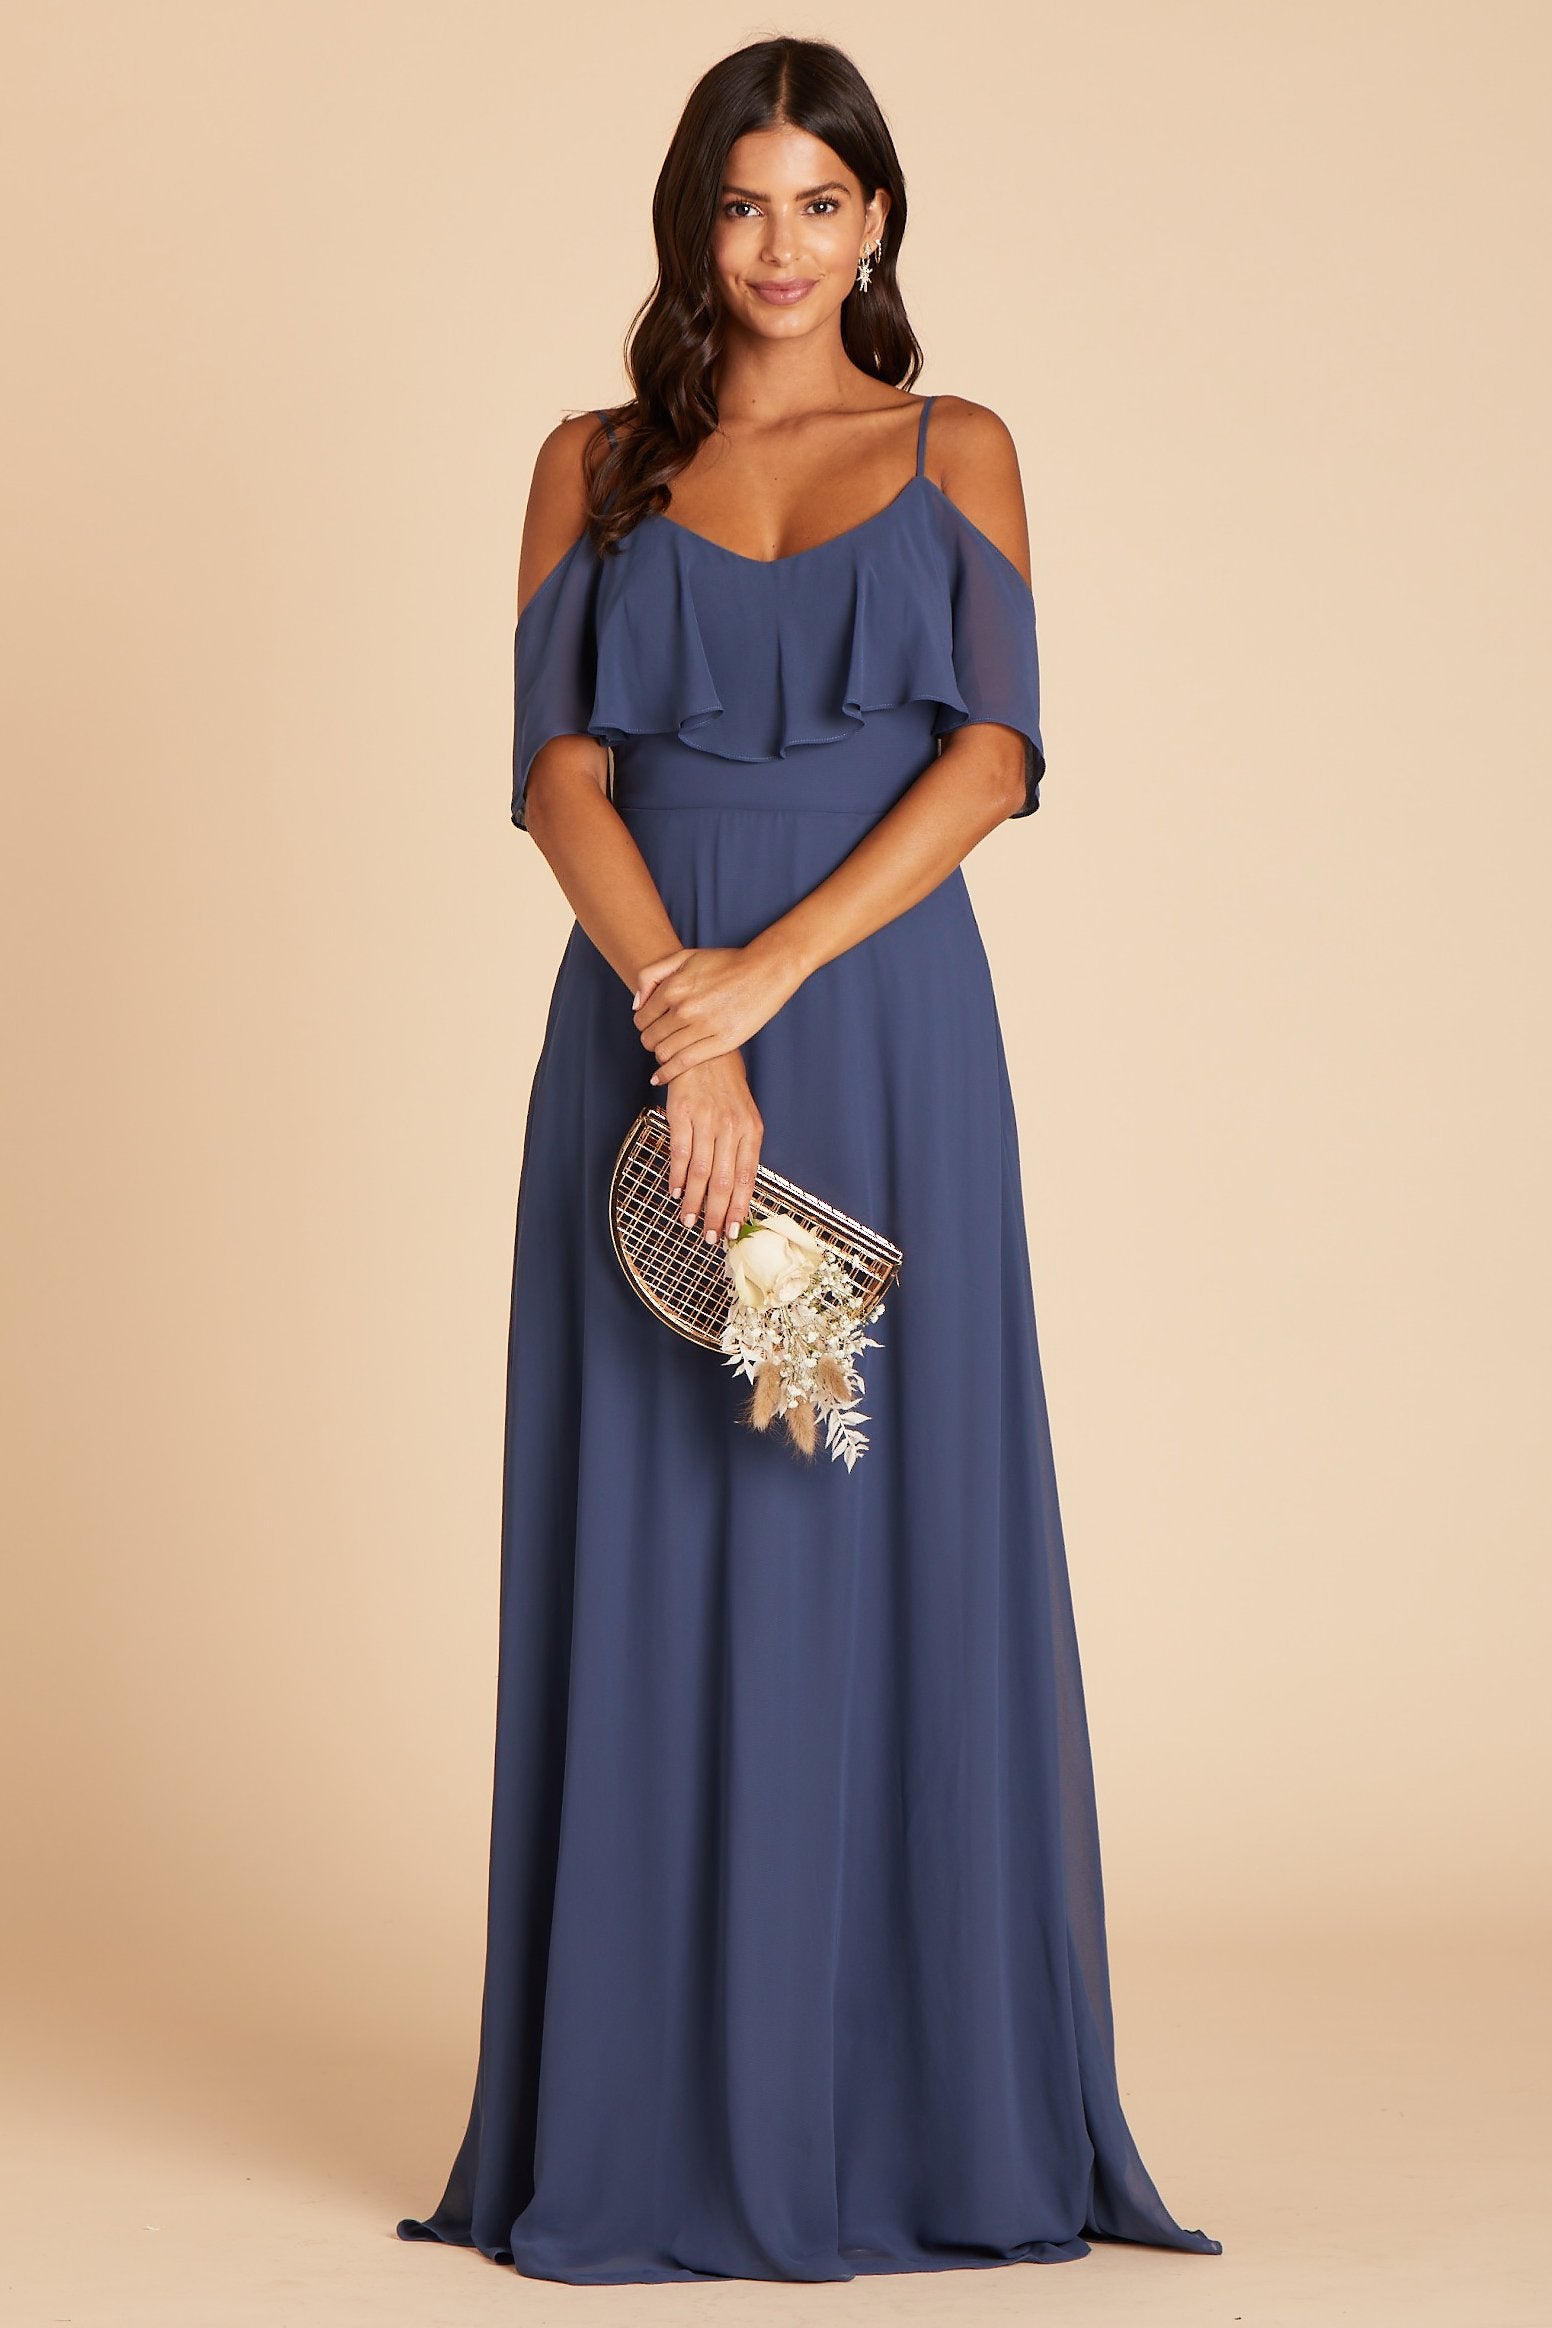 Jane convertible bridesmaid dress in slate blue chiffon by Birdy Grey, front view